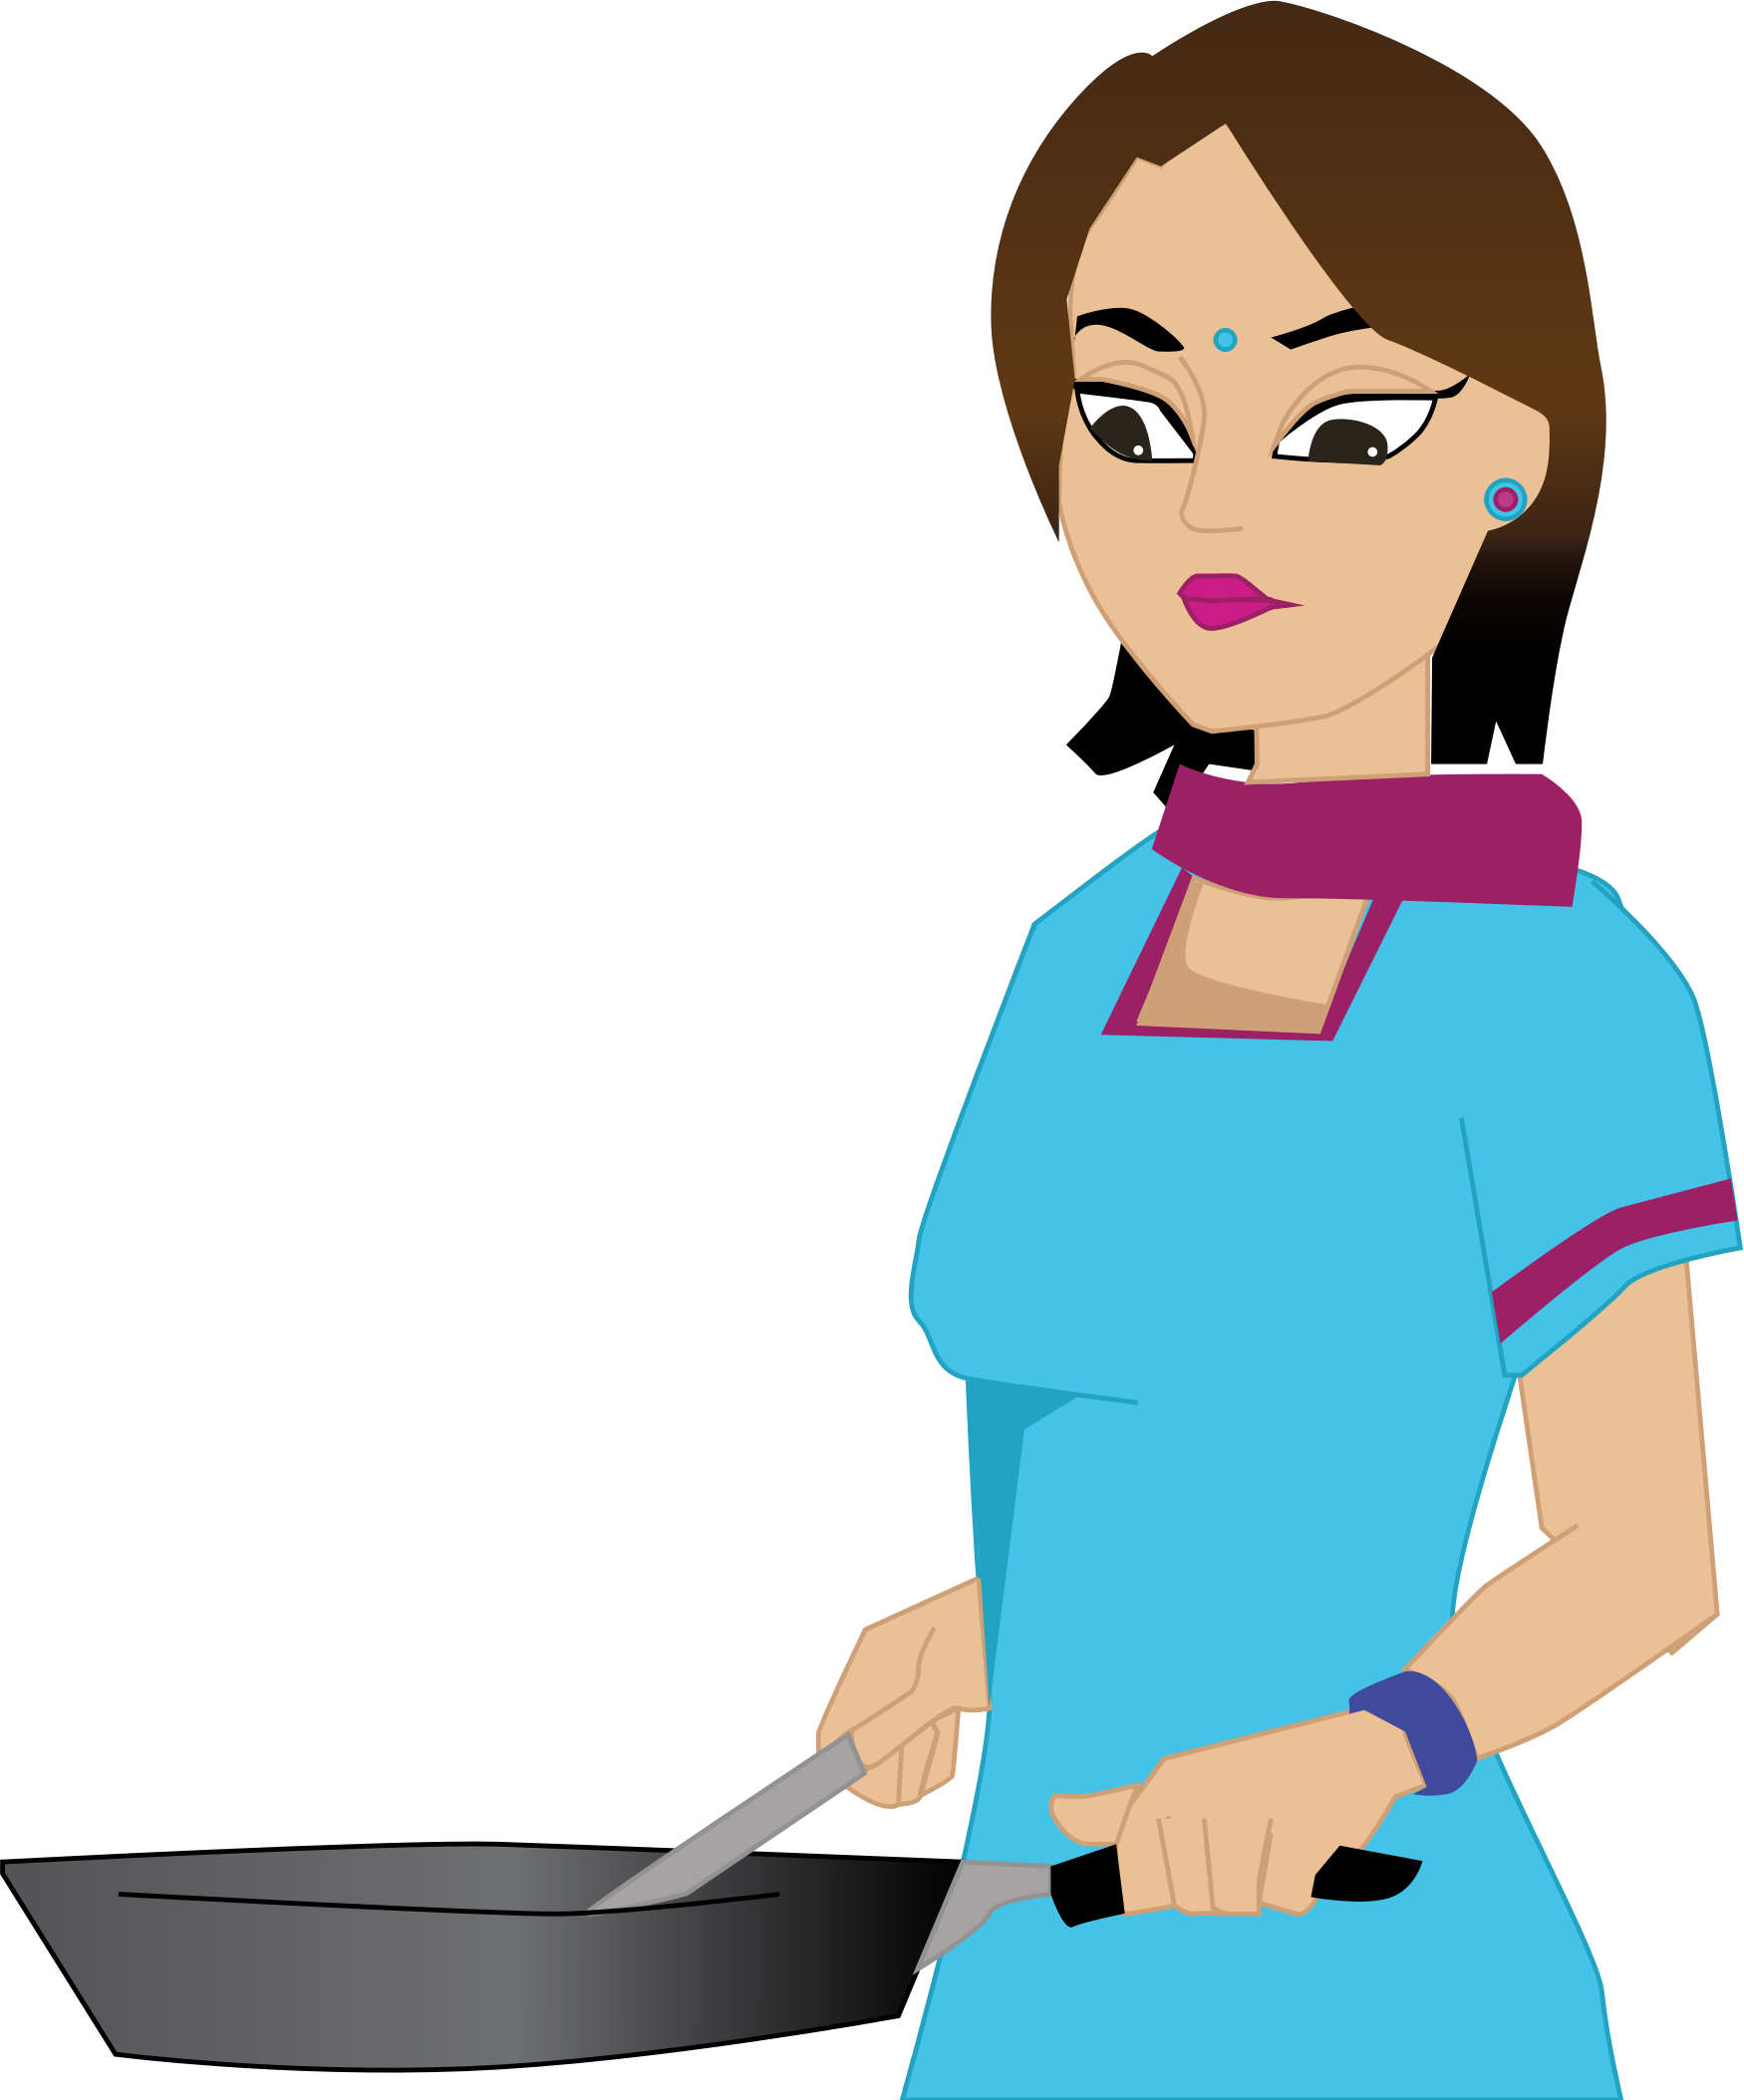 A Cartoon Of A Woman Cooking